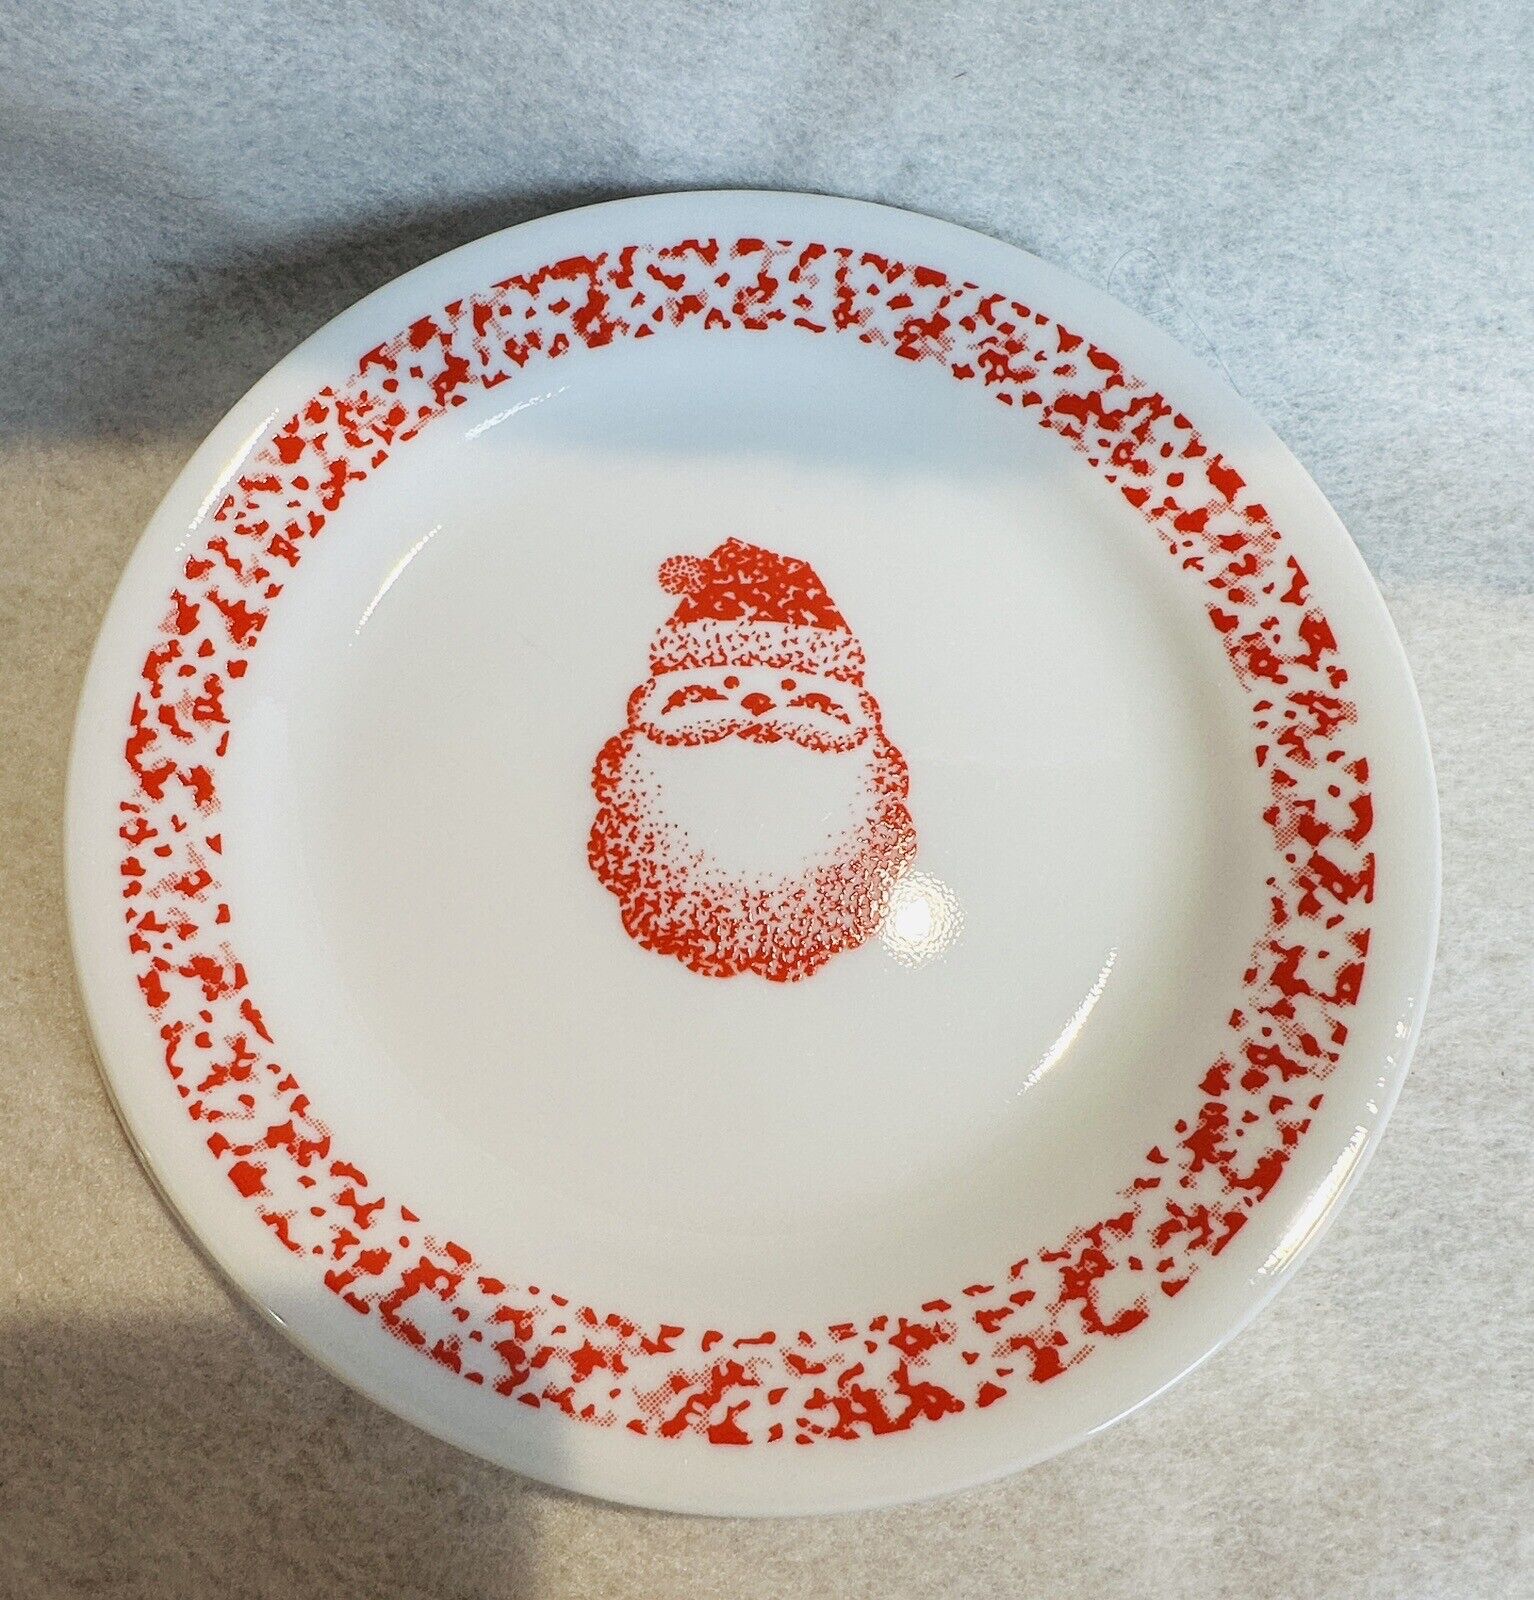 4 Corelle Sponge Ware Santa Lunch Plates 7.25” Red White - Multiples Available